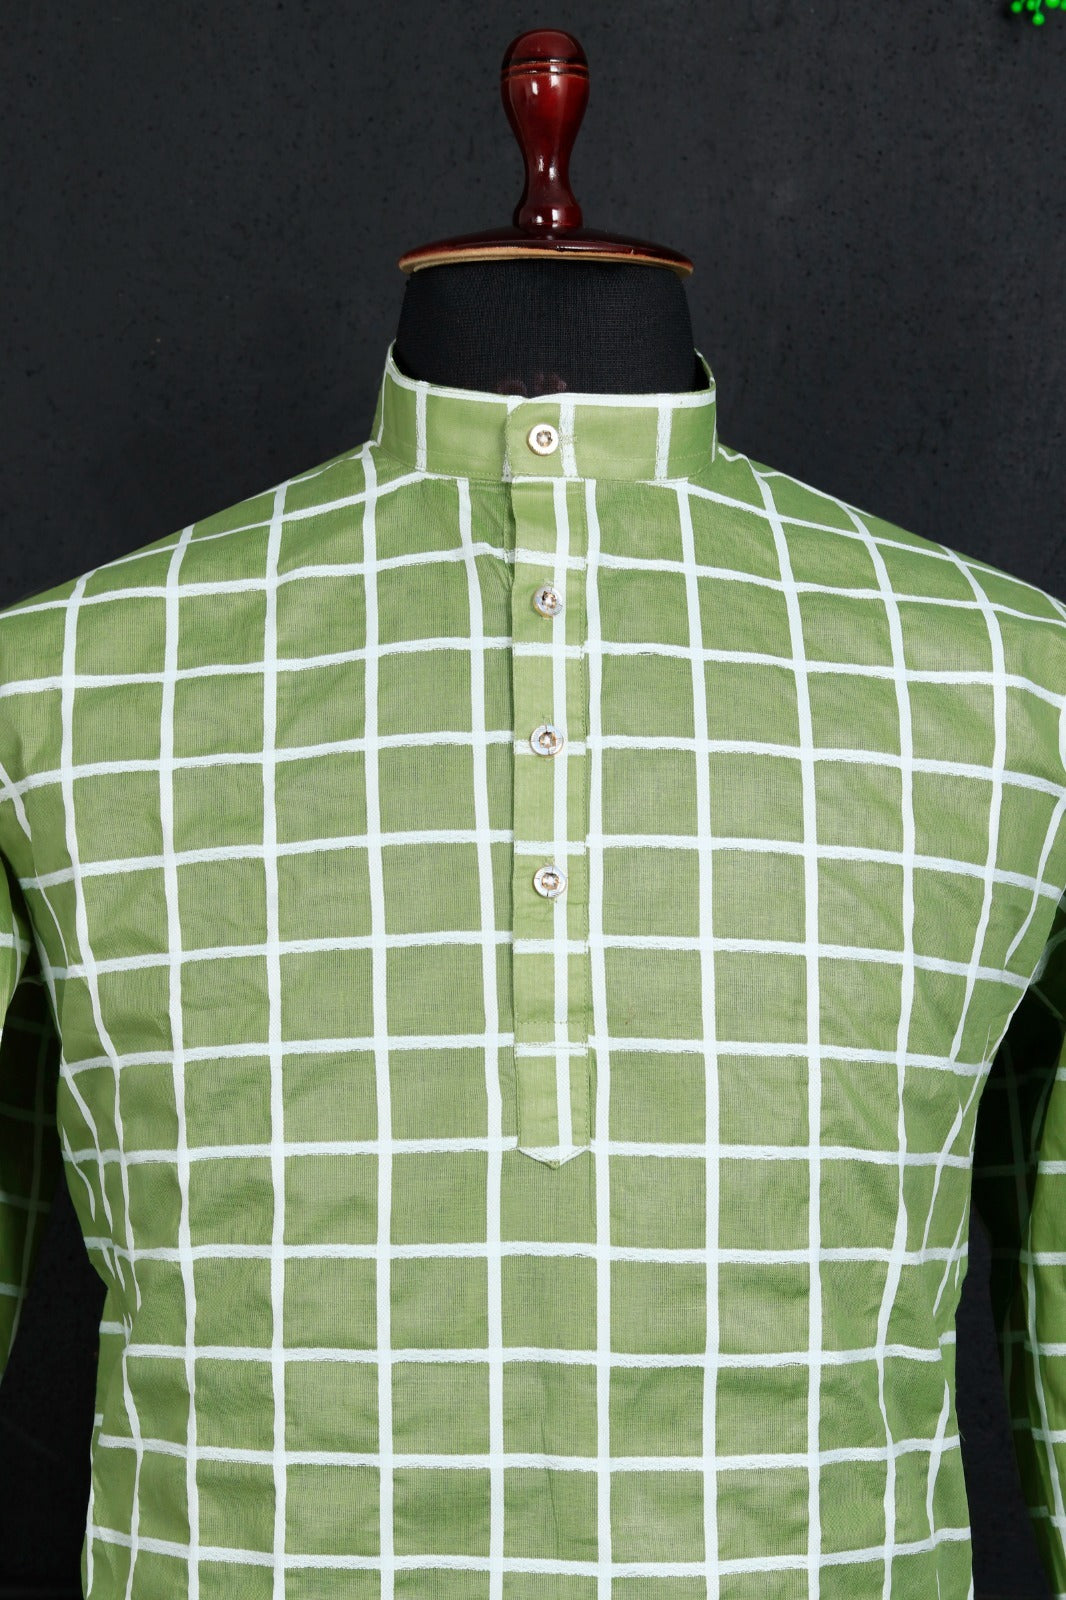 Men's Traditional & Simple Kurta Pajama Anant Tex Exports Private Limited